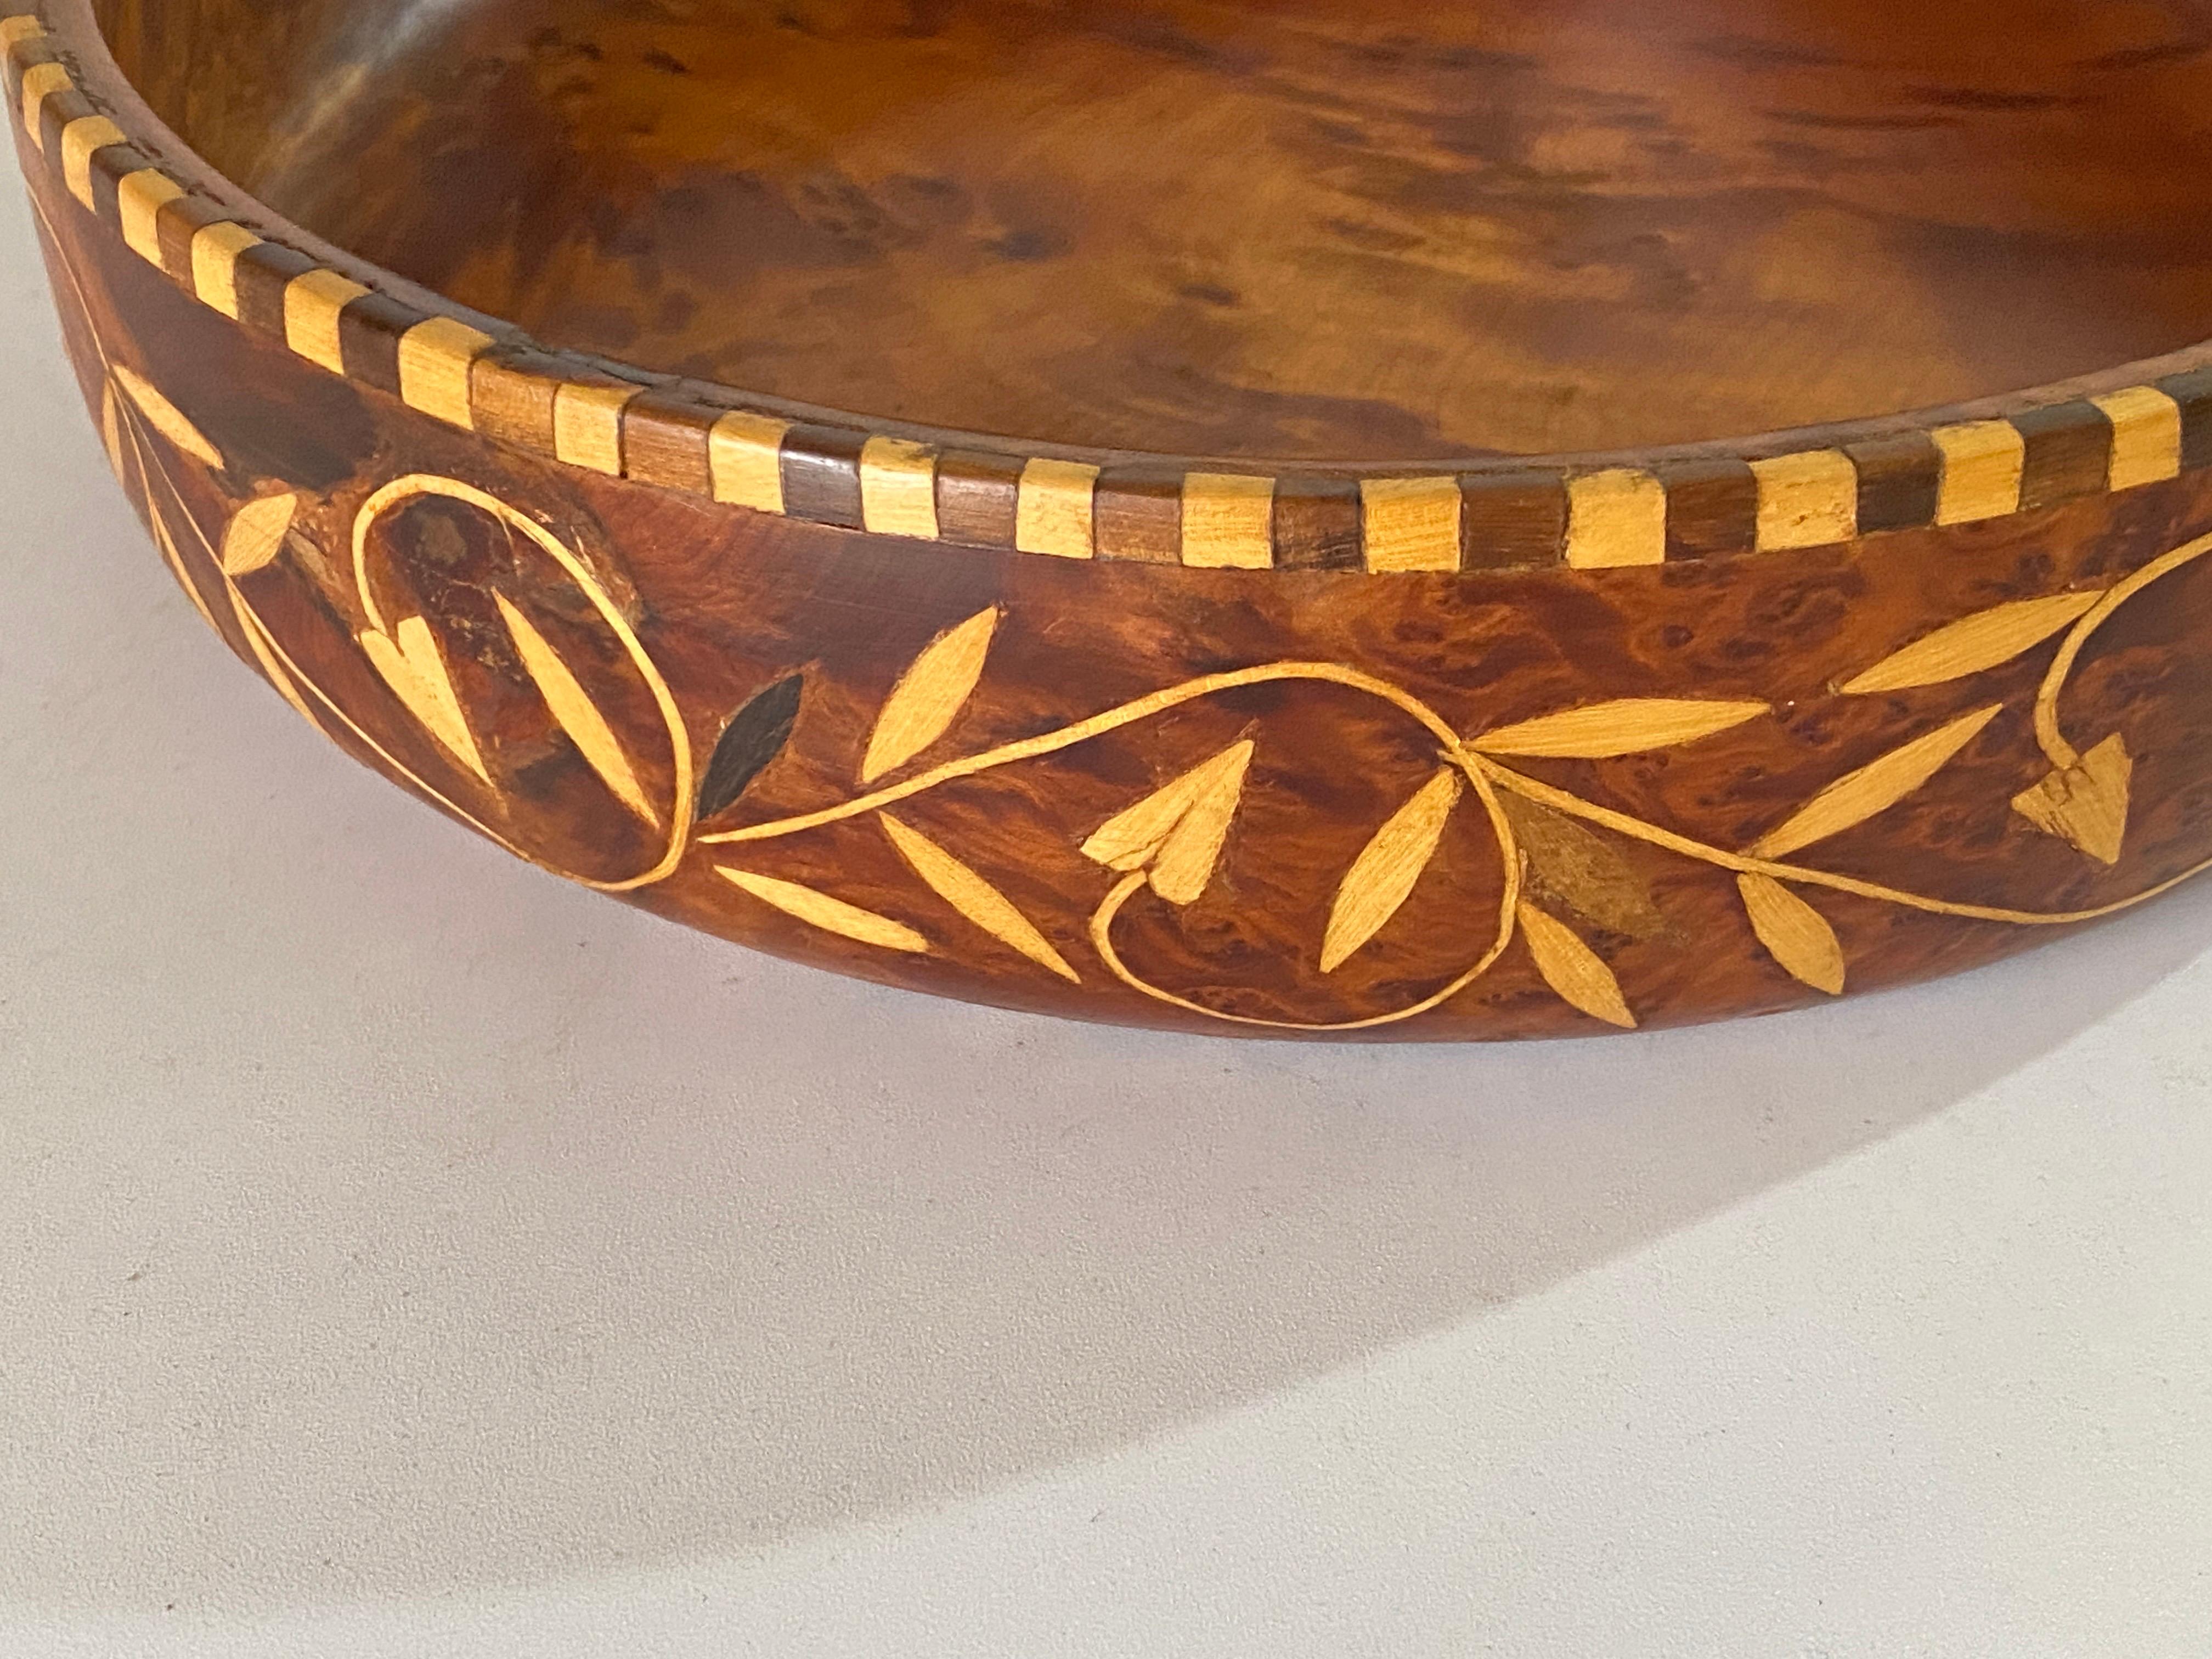 Wood Bowl Old Patina circa 1960 Scandinavian In Good Condition For Sale In Auribeau sur Siagne, FR